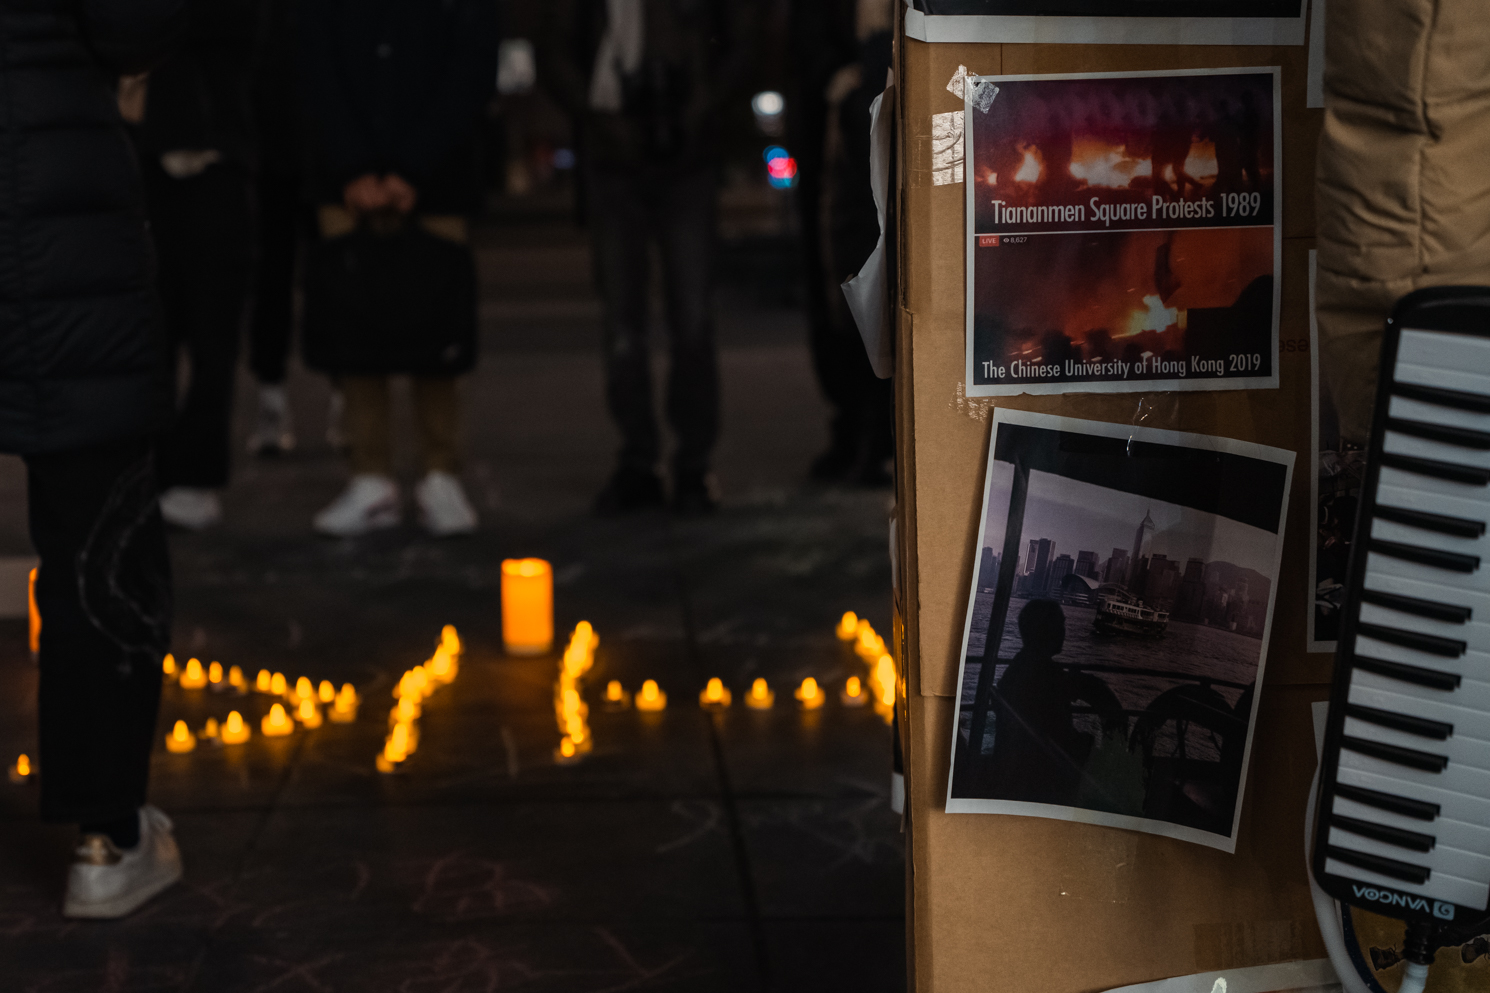 In the foreground are posters showing the Tiananmen Square Protest in 1989. In the background are candles on the ground in a formation that spells "HK"